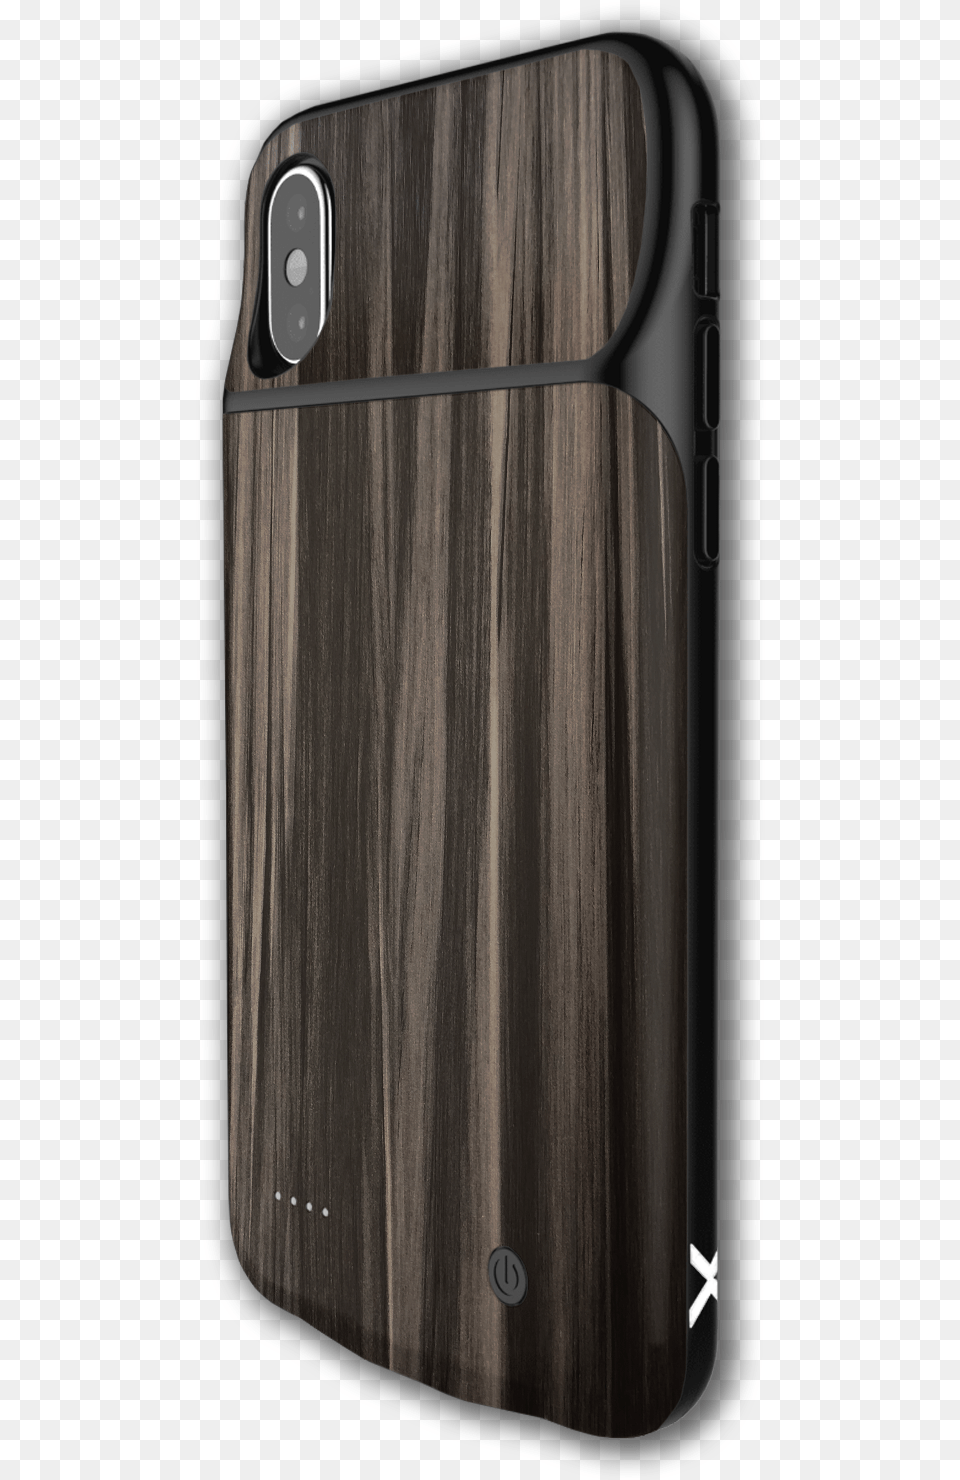 Lux Skin Iphone Wood Grain Smartphone, Electronics, Mobile Phone, Phone Png Image